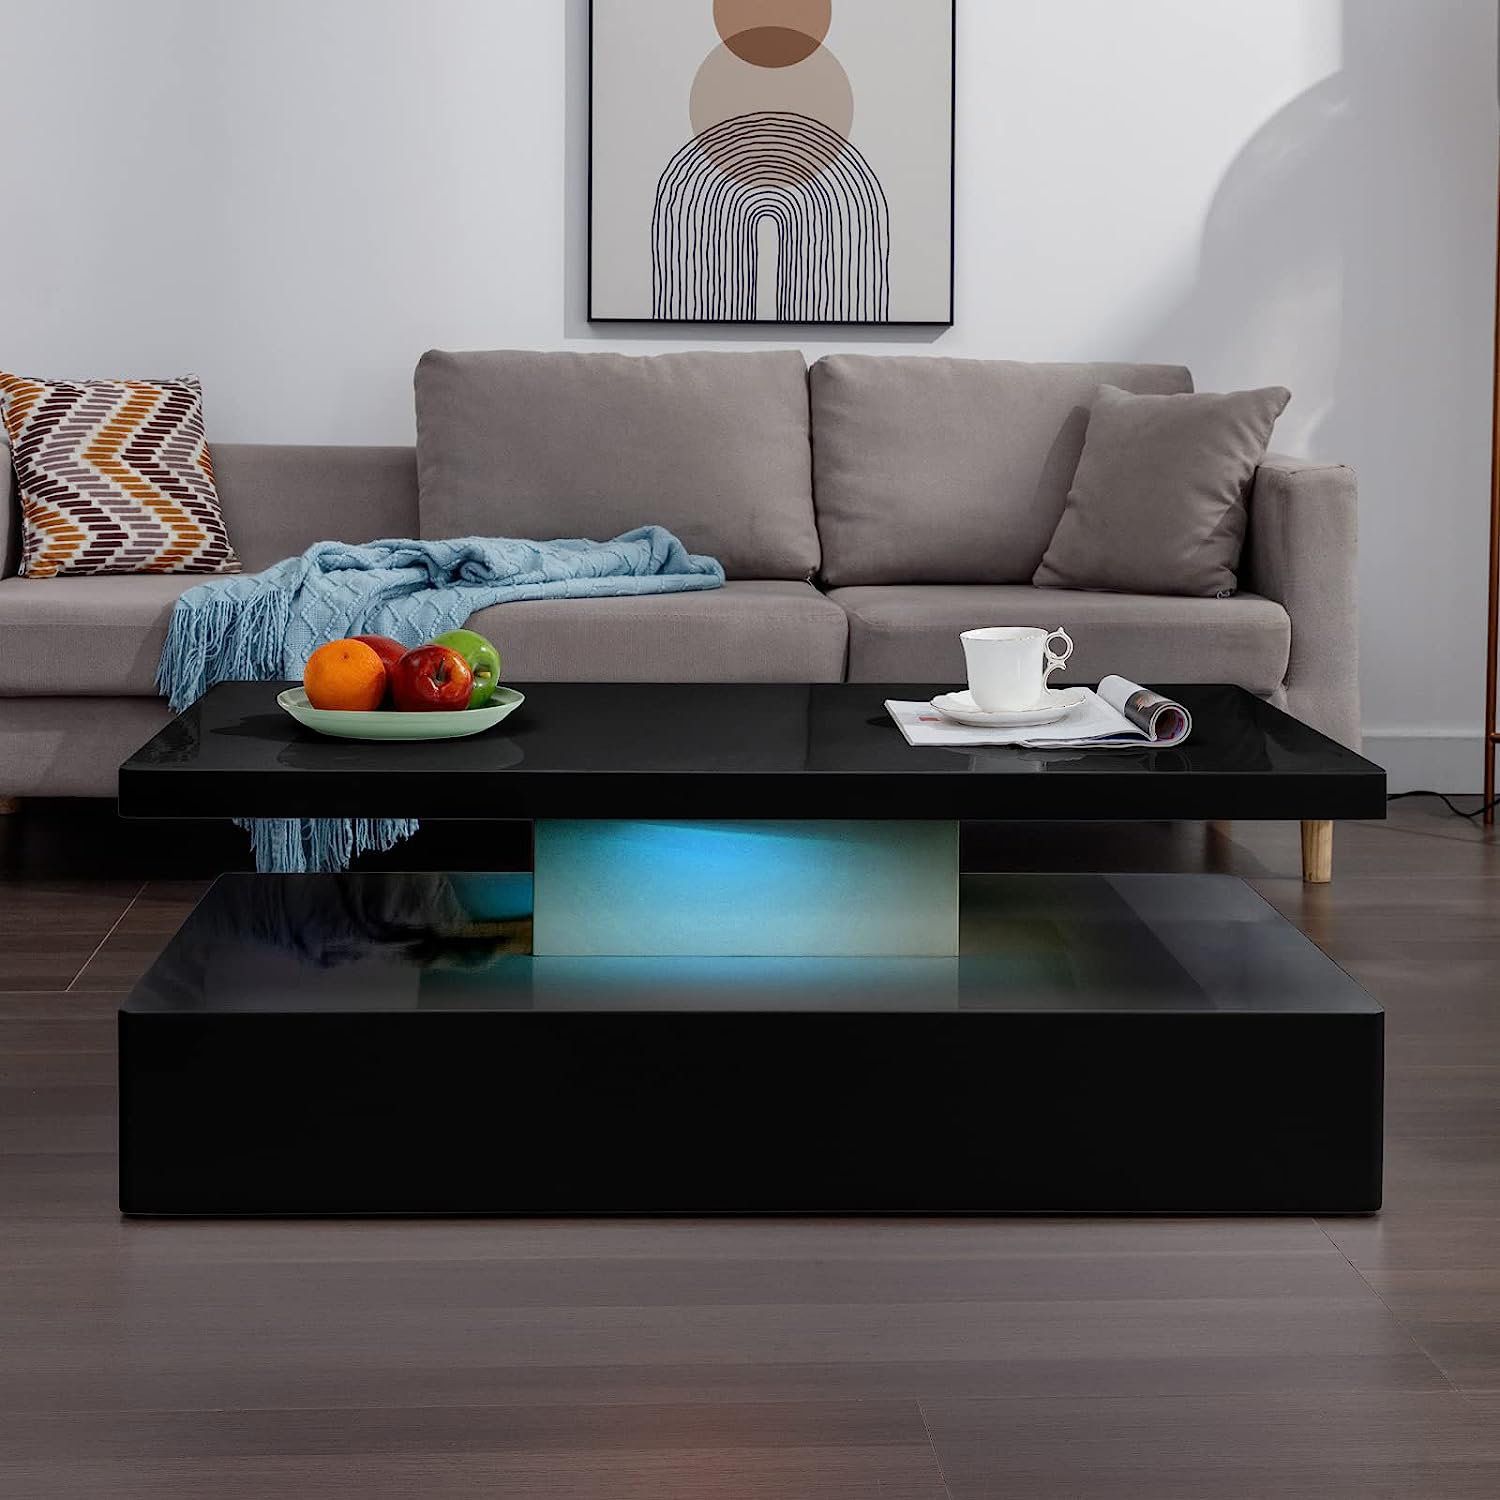 Ivy Bronx Tabu Modern Led Coffee Table With 12 Colors Lights, Living Room Table  Furniture/end Table & Reviews | Wayfair Pertaining To Rectangular Led Coffee Tables (View 6 of 15)